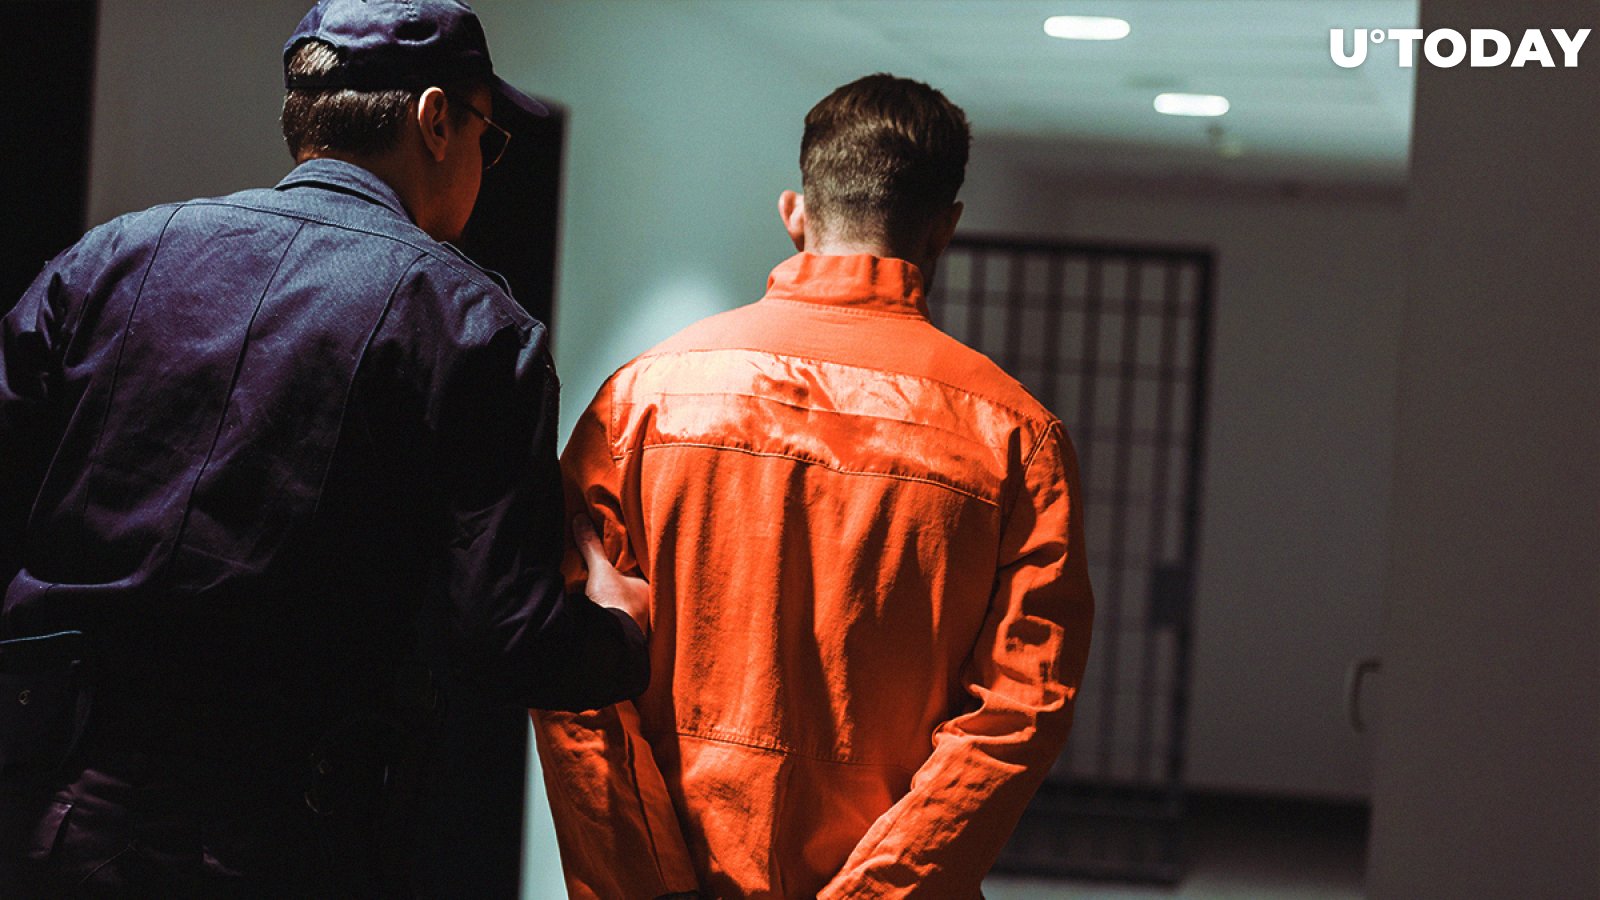 Bitcoin Scammer Gets Prison Sentence After Stealing $200,000